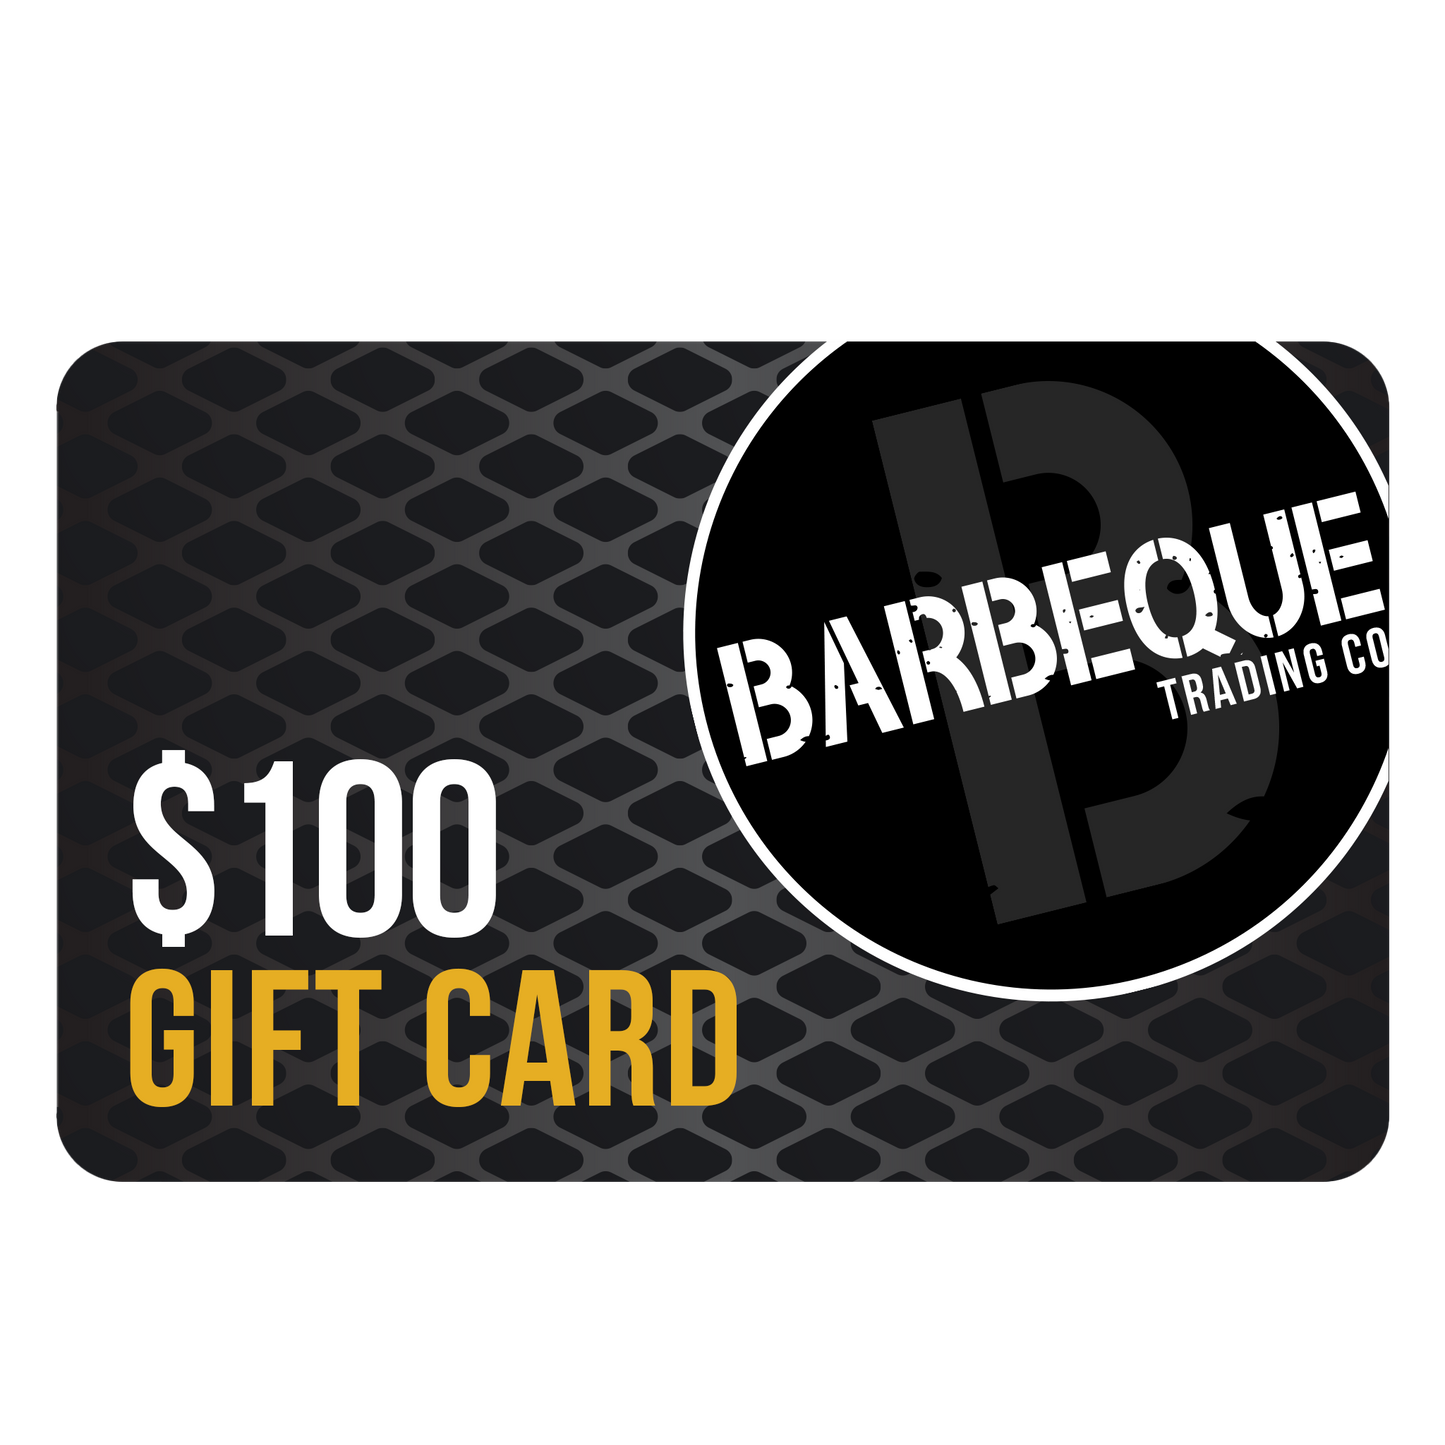 Barbeque Trading Co. Gift Card